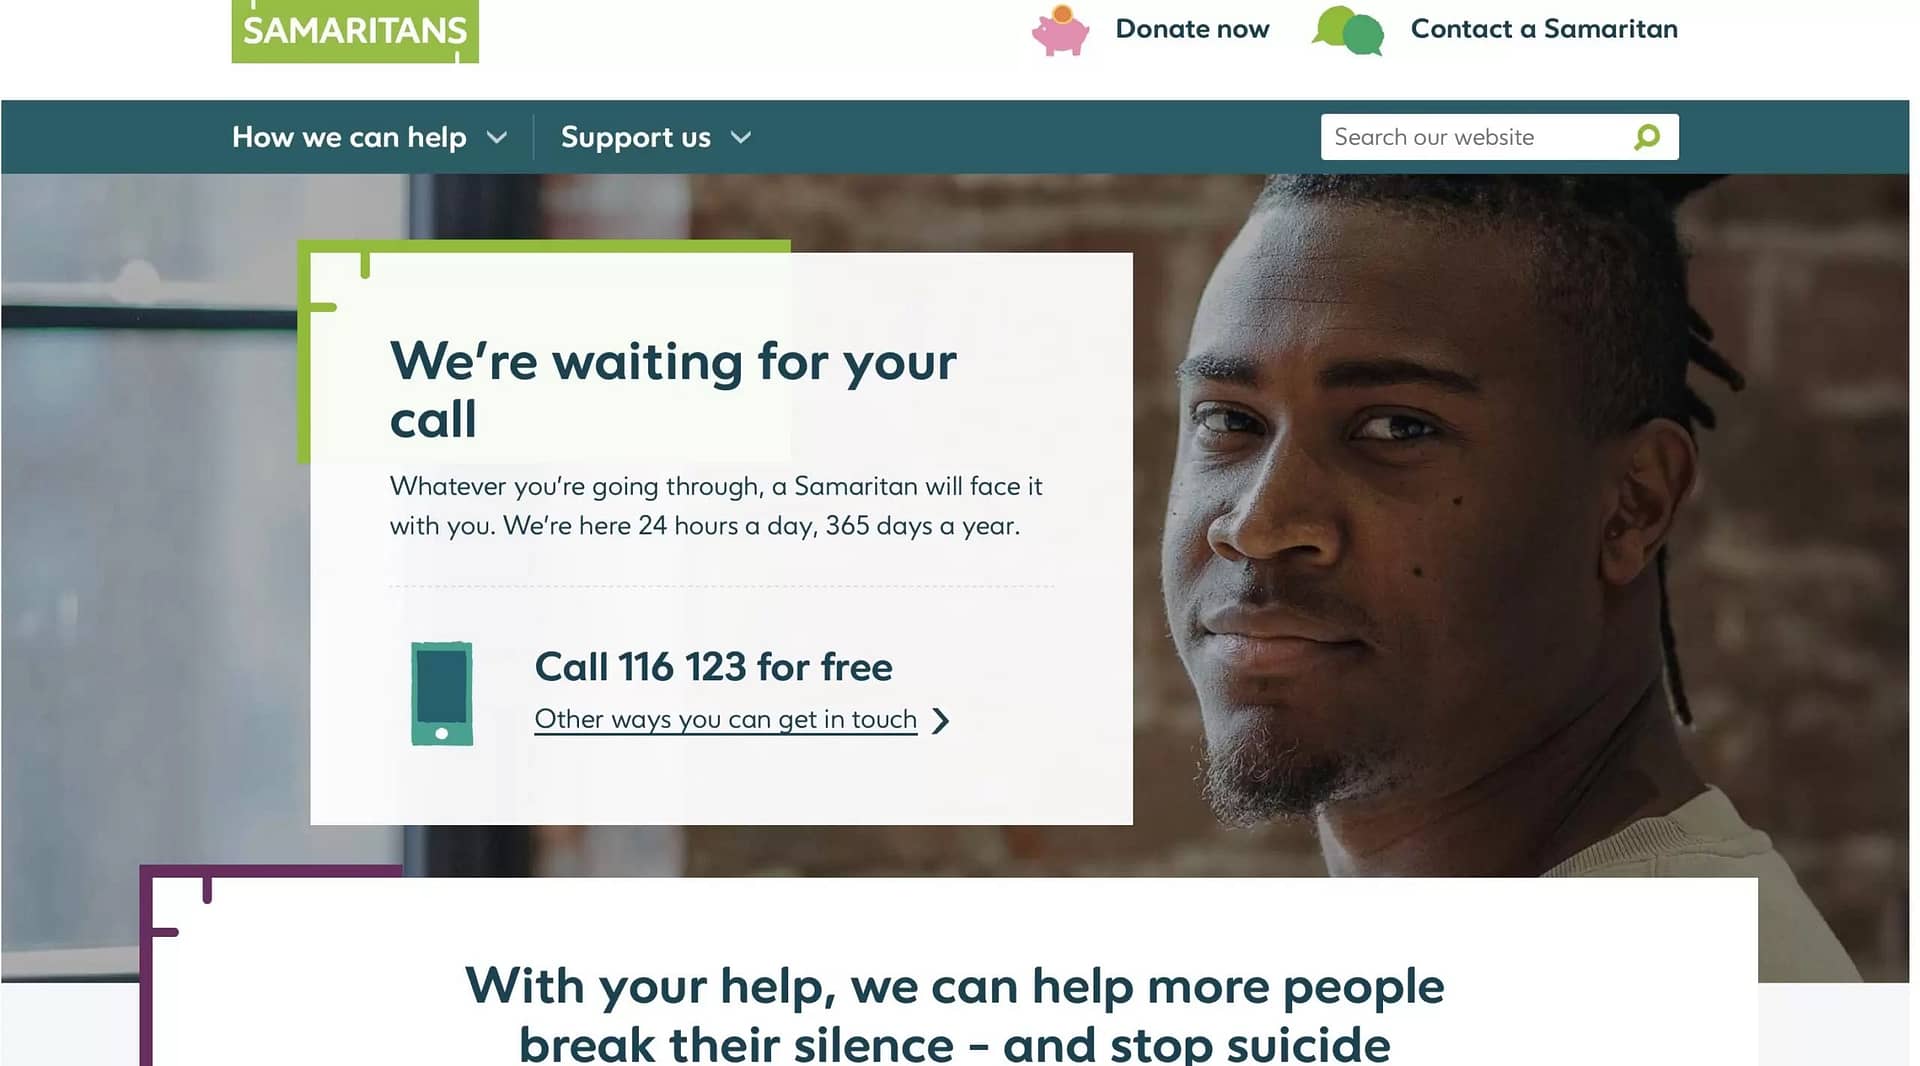 The Samaritans - Specialist Support